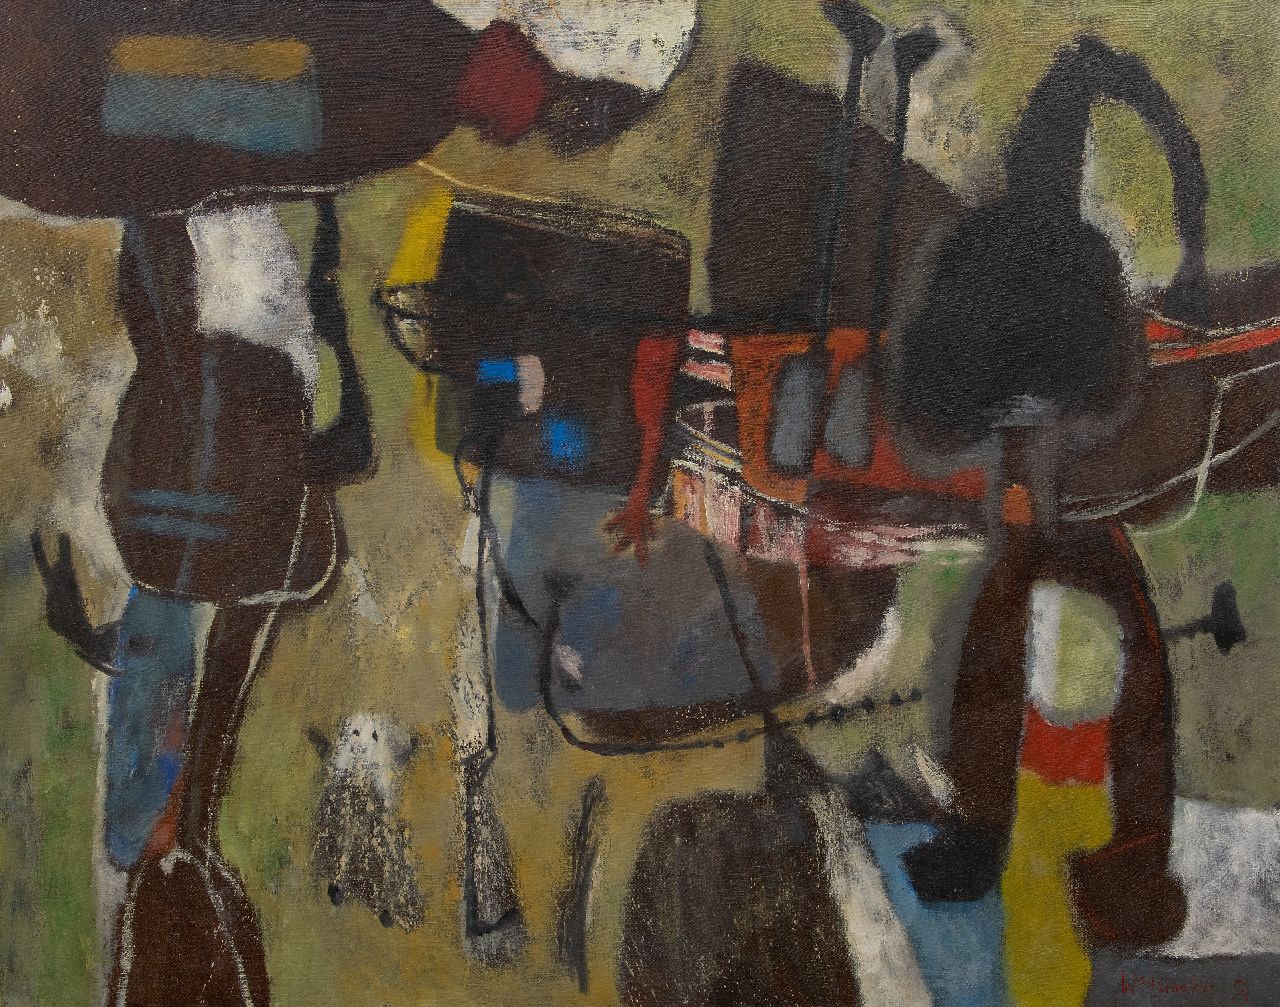 Wagemaker A.B.  | Adriaan Barend 'Jaap' Wagemaker | Paintings offered for sale | Donkere figuren (Dark figures), oil on canvas 106.4 x 130.3 cm, signed l.r. and dated '54